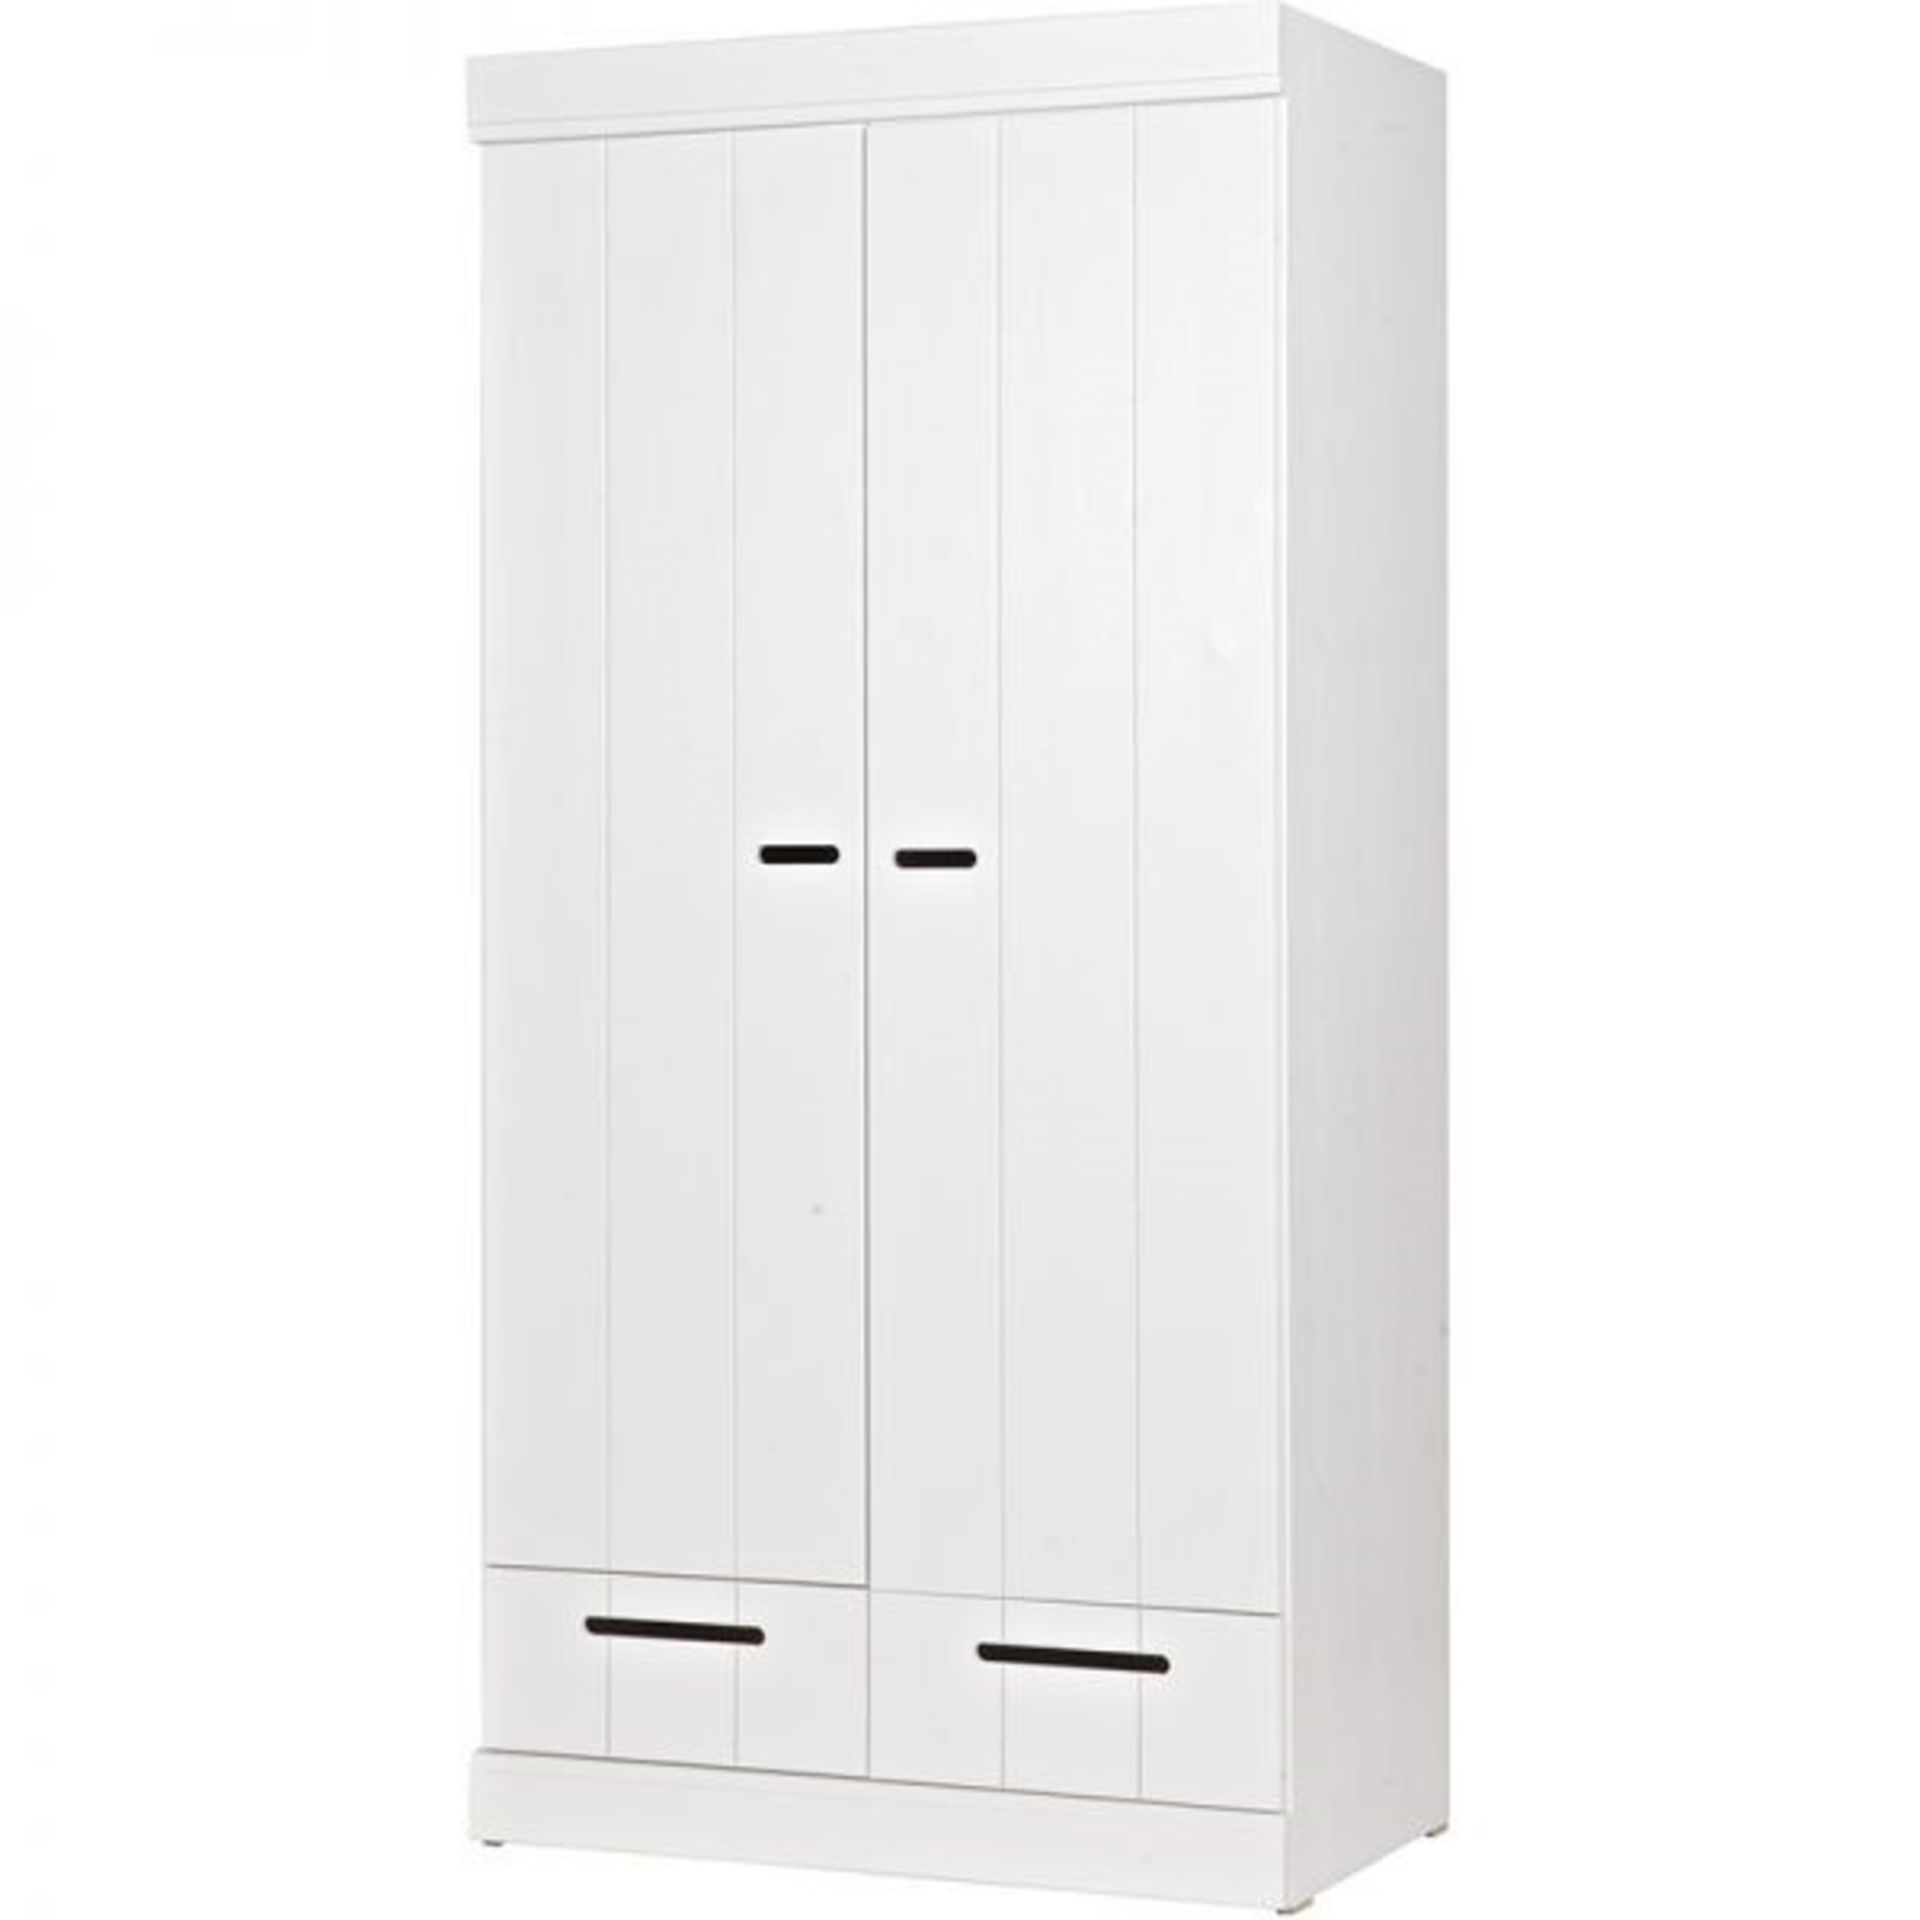 1 x WOOOD Designs 'Connect' Solid Wood Scandinavian Style 2-Door 2 Drawer Wardrobe In WHITE - Boxed - Image 4 of 8